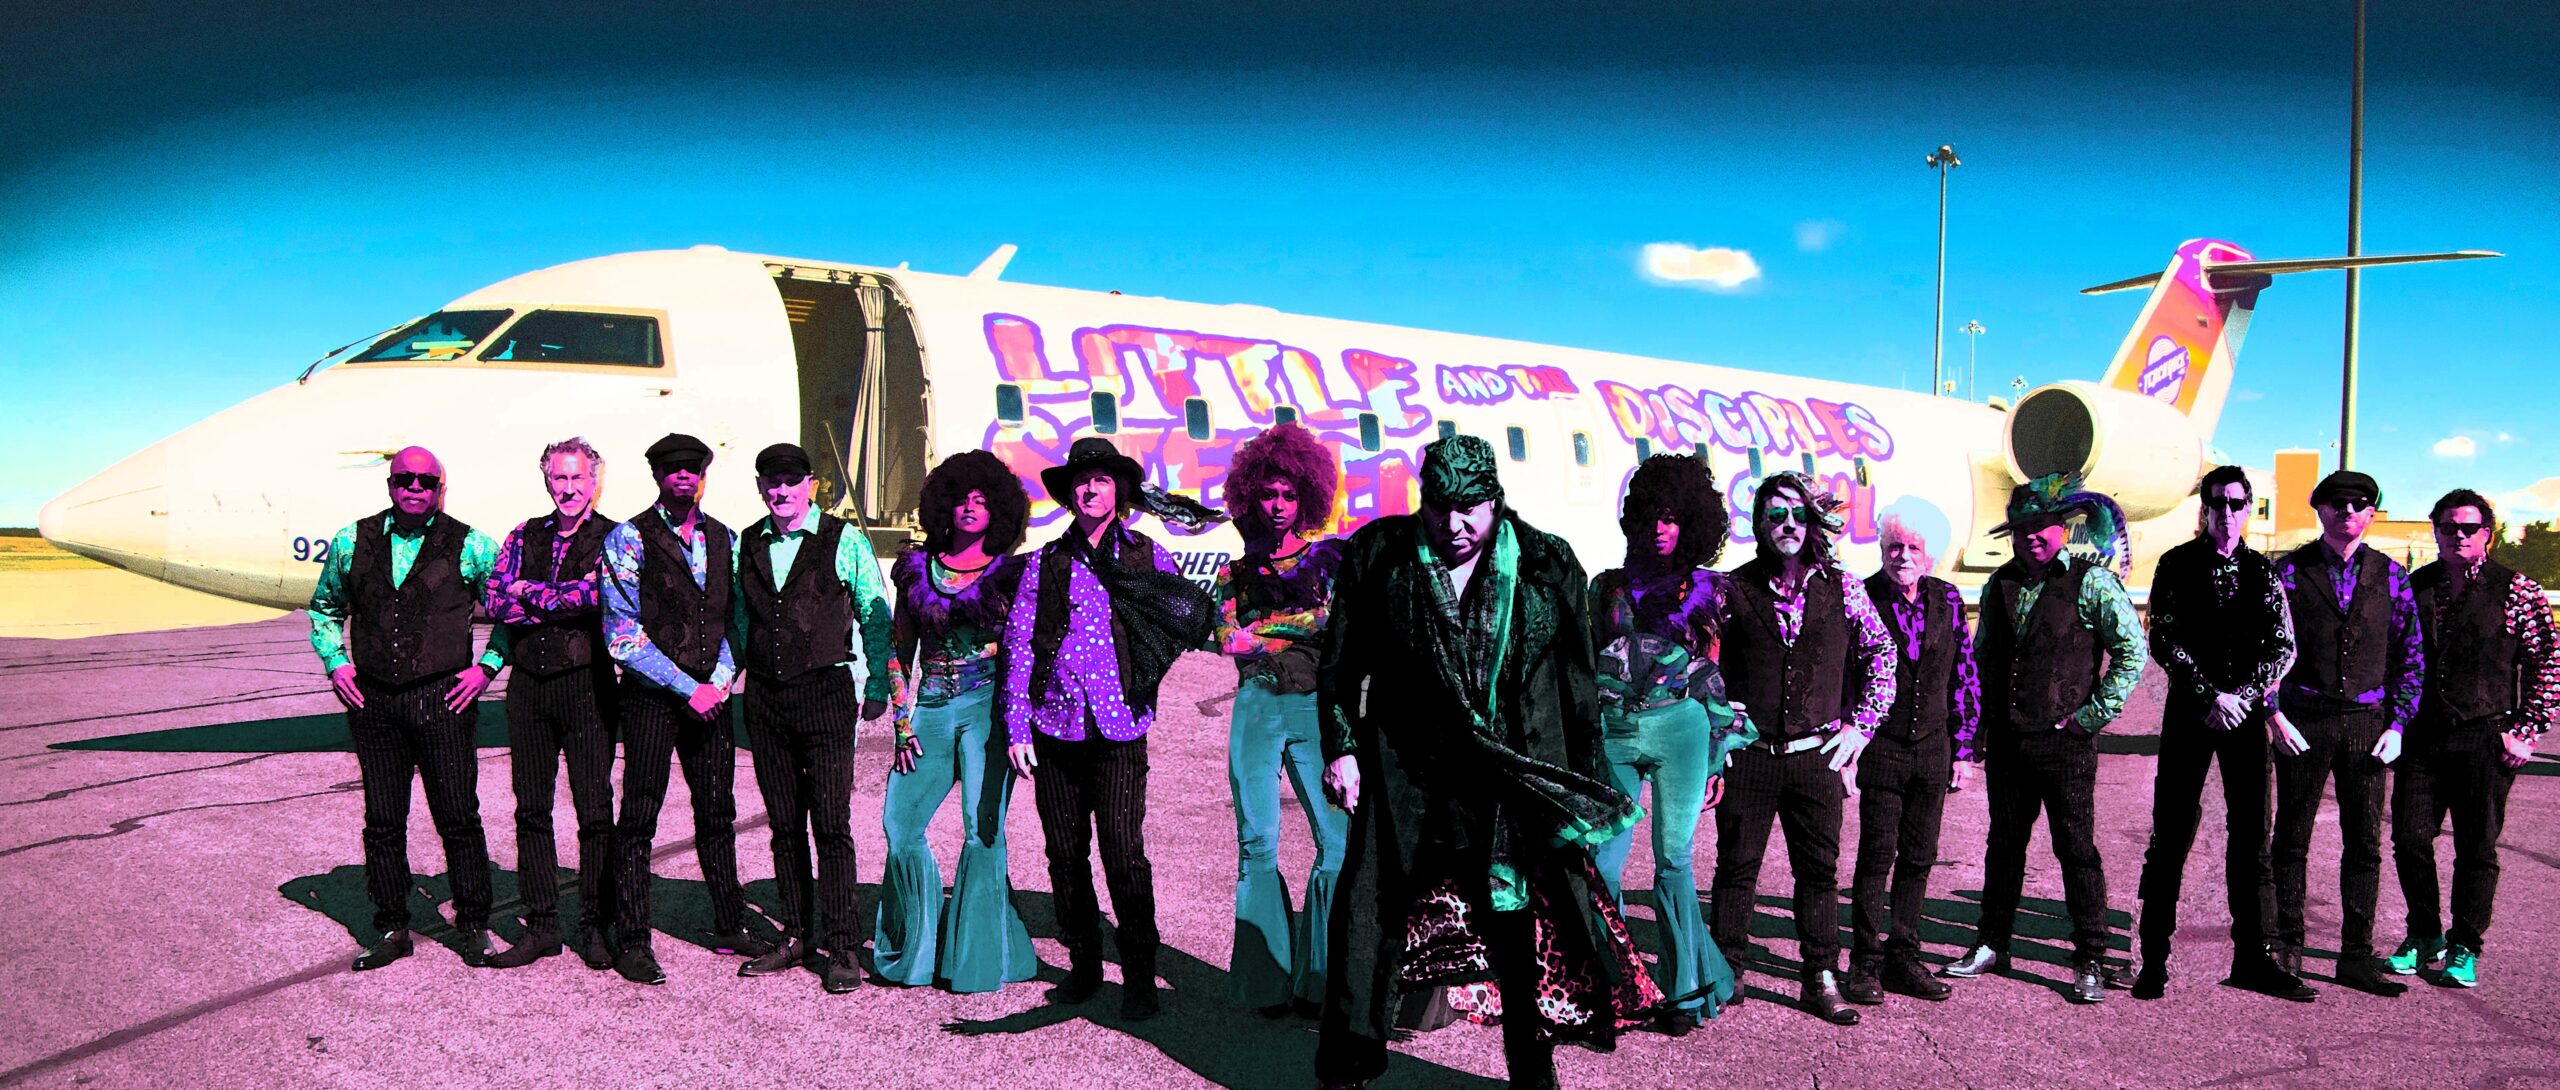 Little Stevie Van Zandt and the Disciples of Soul in front of their plane